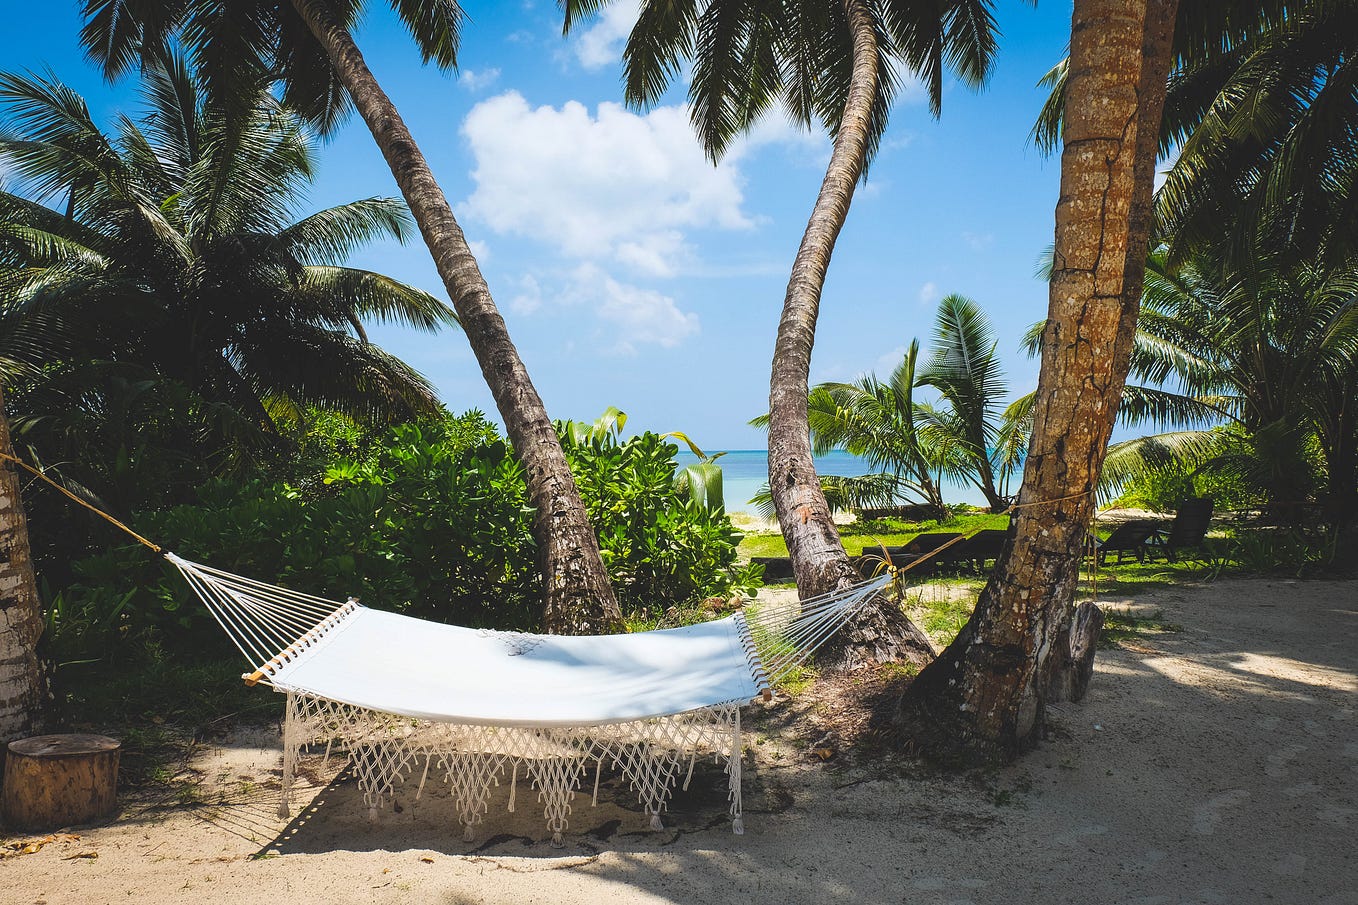 How To Be Mindful In A Distracted World: 7 Tips For A Calmer You. A white hammock is strung between two palm trees on a white sandy beach. The sky is clear blue, and the blue ocean is seen in the distance.